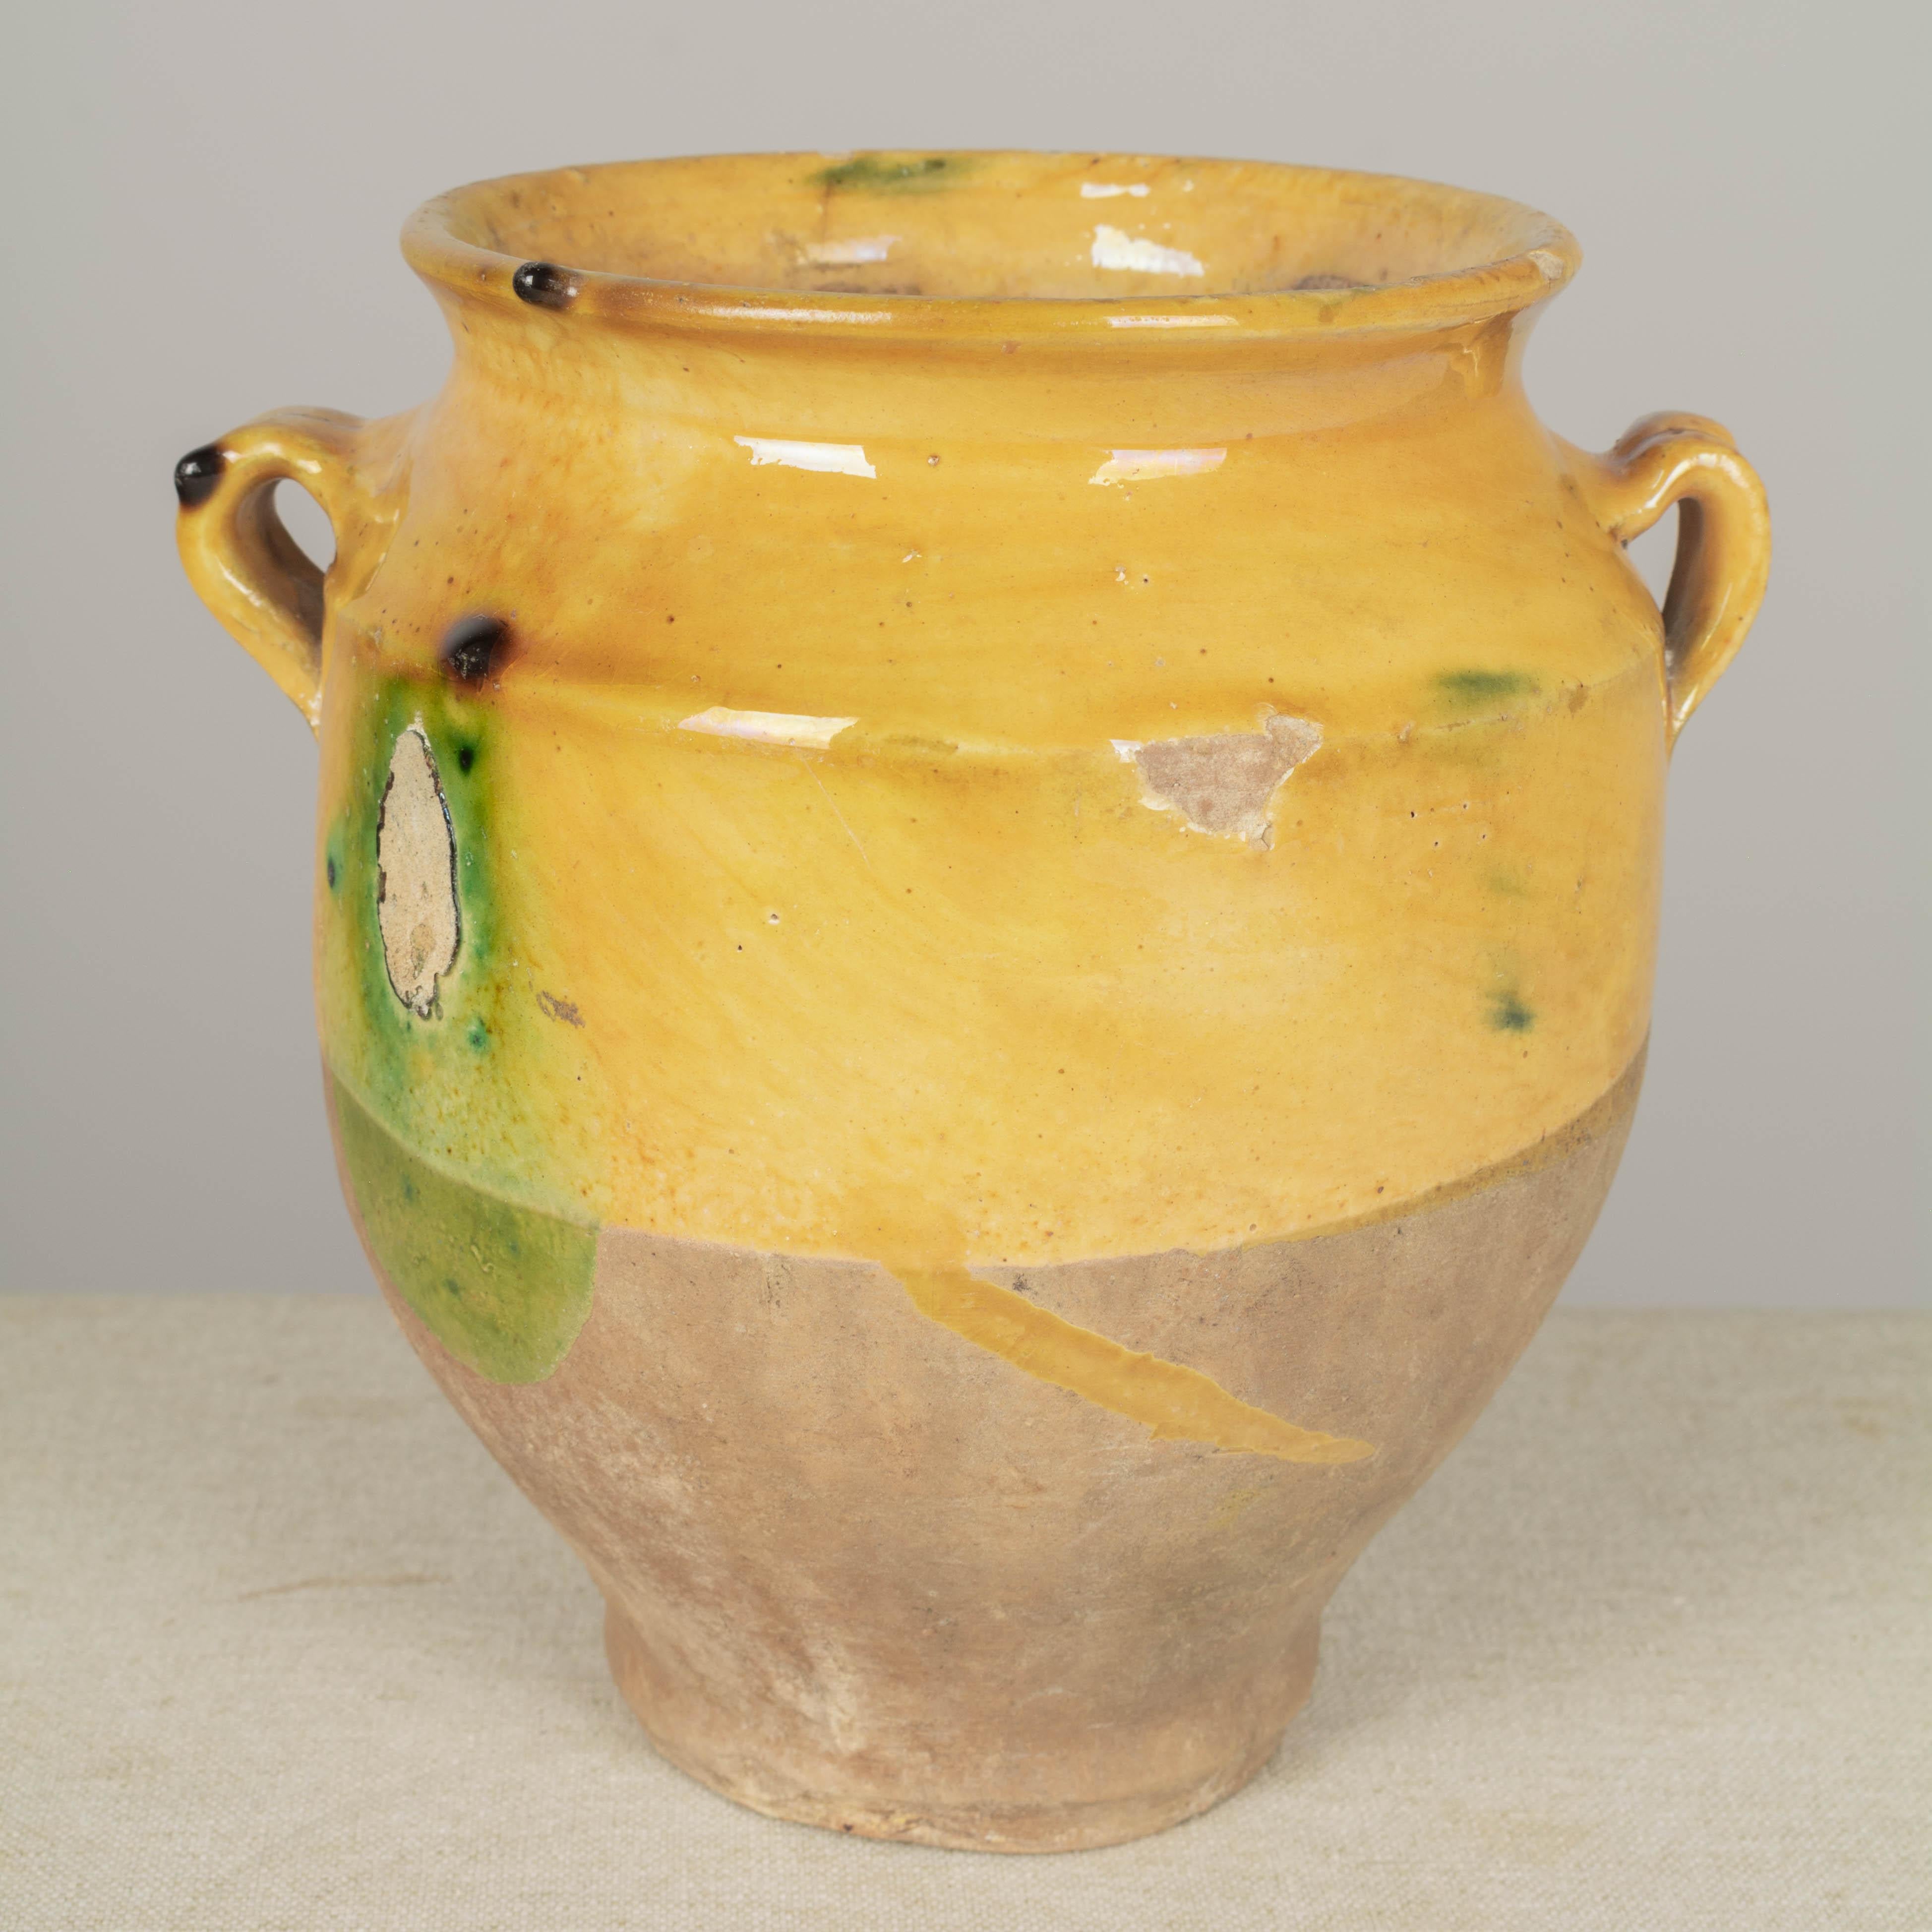 A small earthenware confit pot from the Southwest of France with traditional yellow ochre glaze with green drips. Minor chips and losses to glaze. These ordinary earthenware vessels were once used daily in the French country home and have beautiful